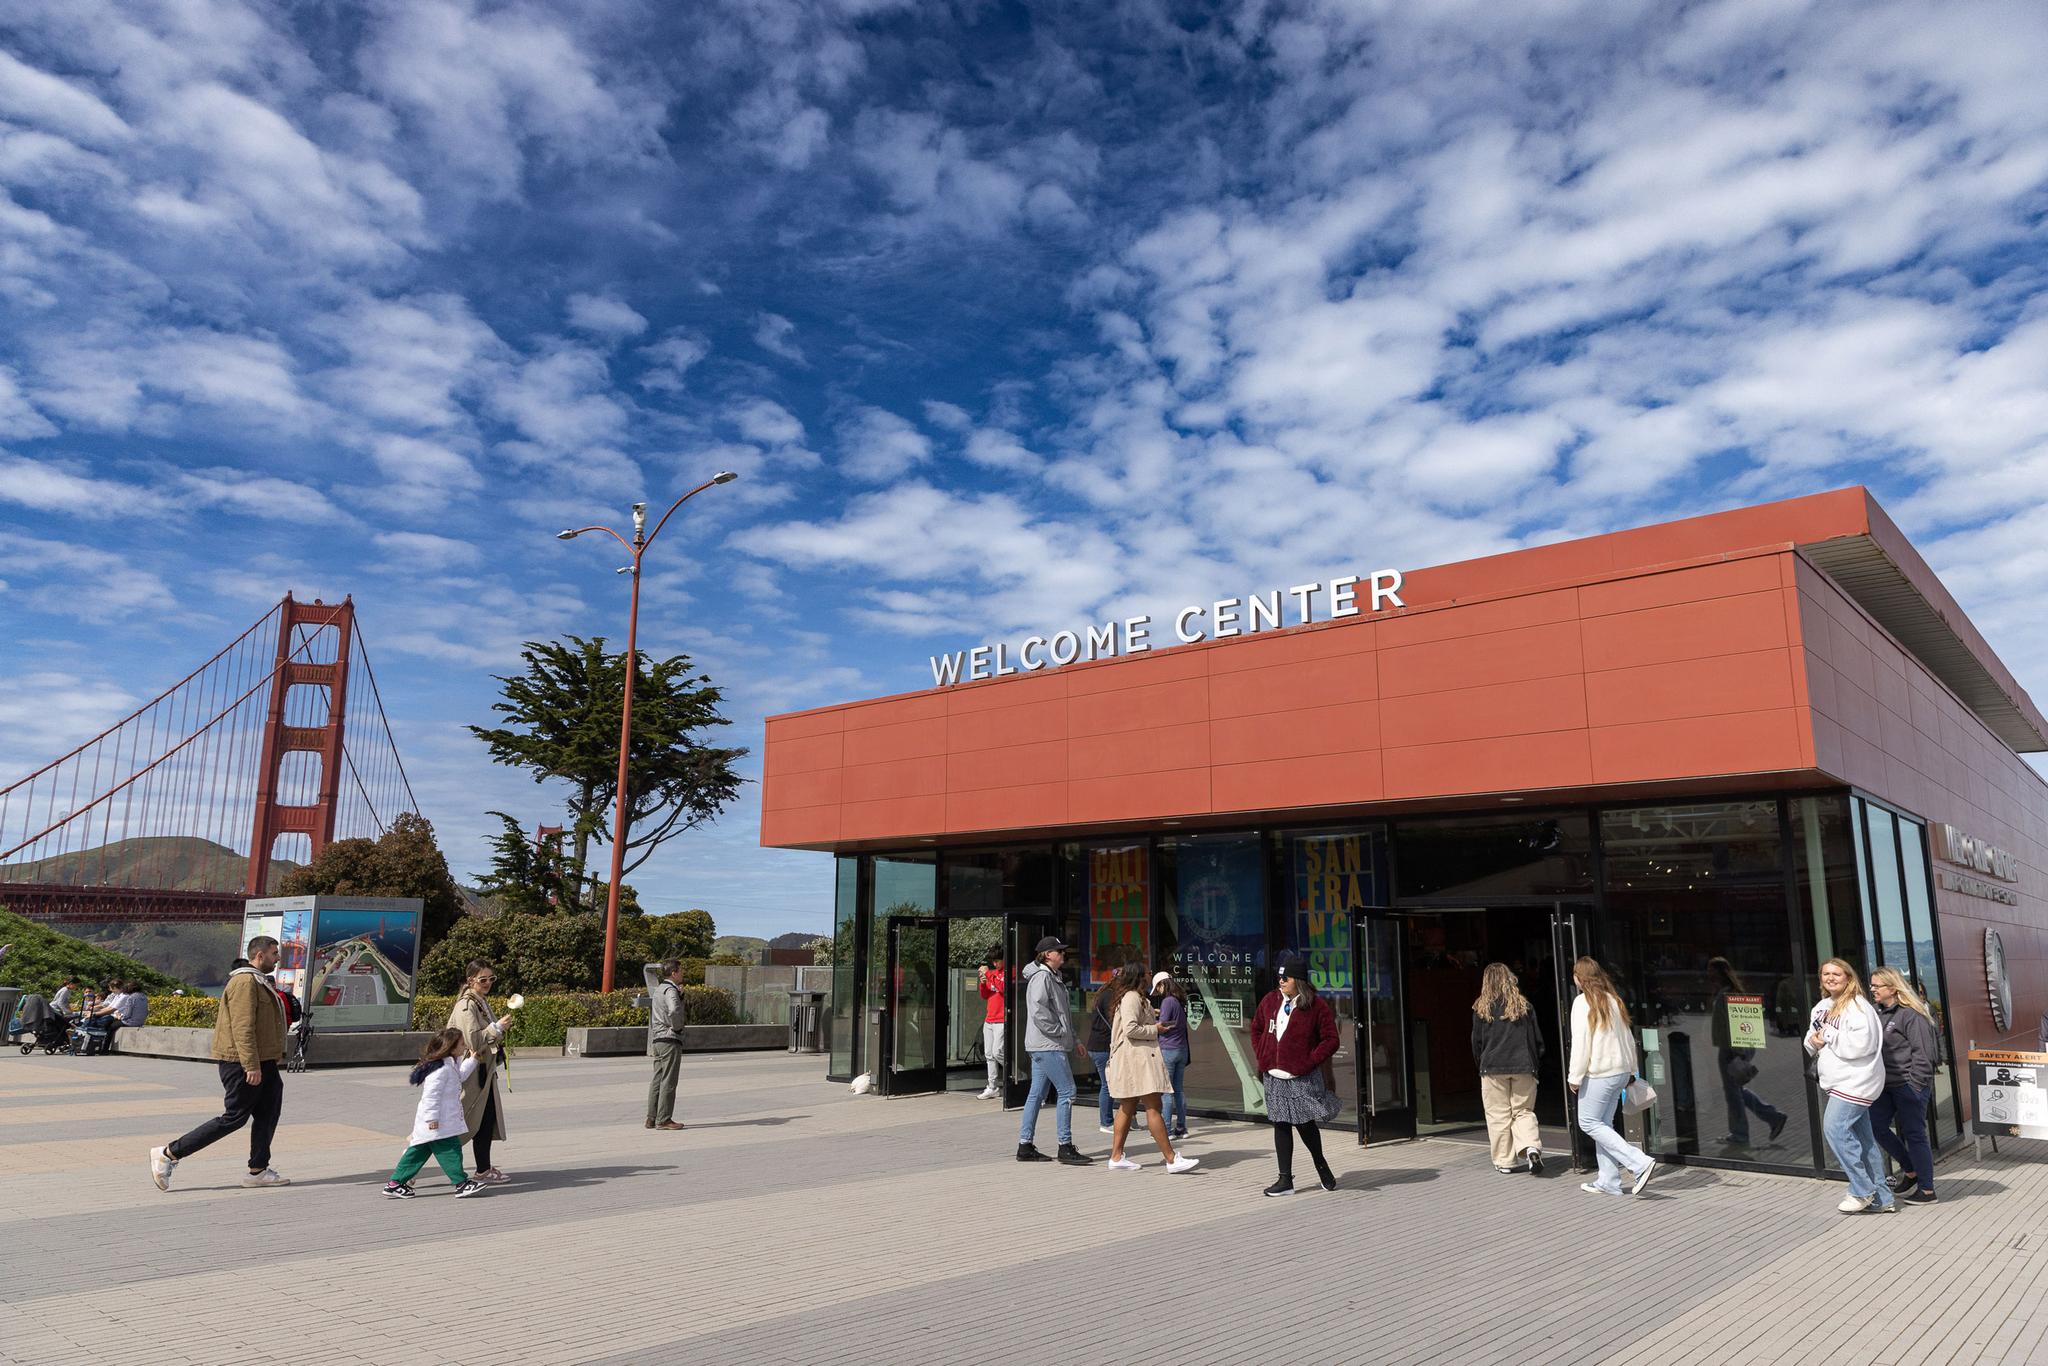 Visitors entering the Golden Gate Bridge Welcome Center in the Presidio. Photo by Myleen Hollero.